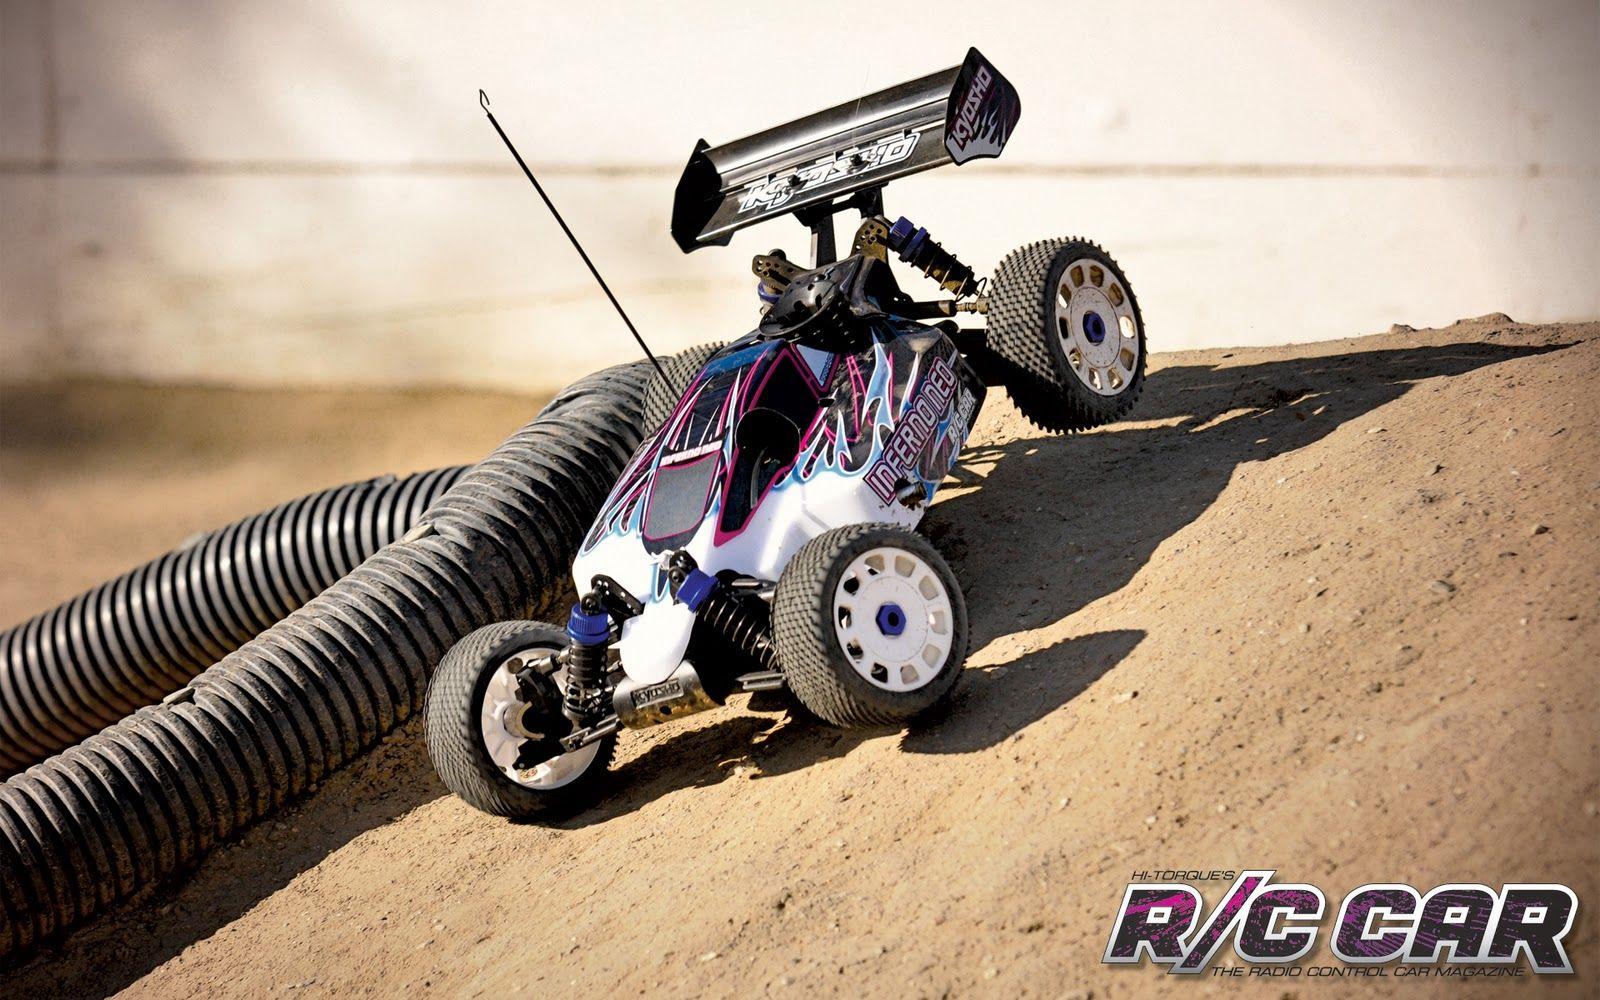 RC CARS HOBBY: Best Rc Wallpapers